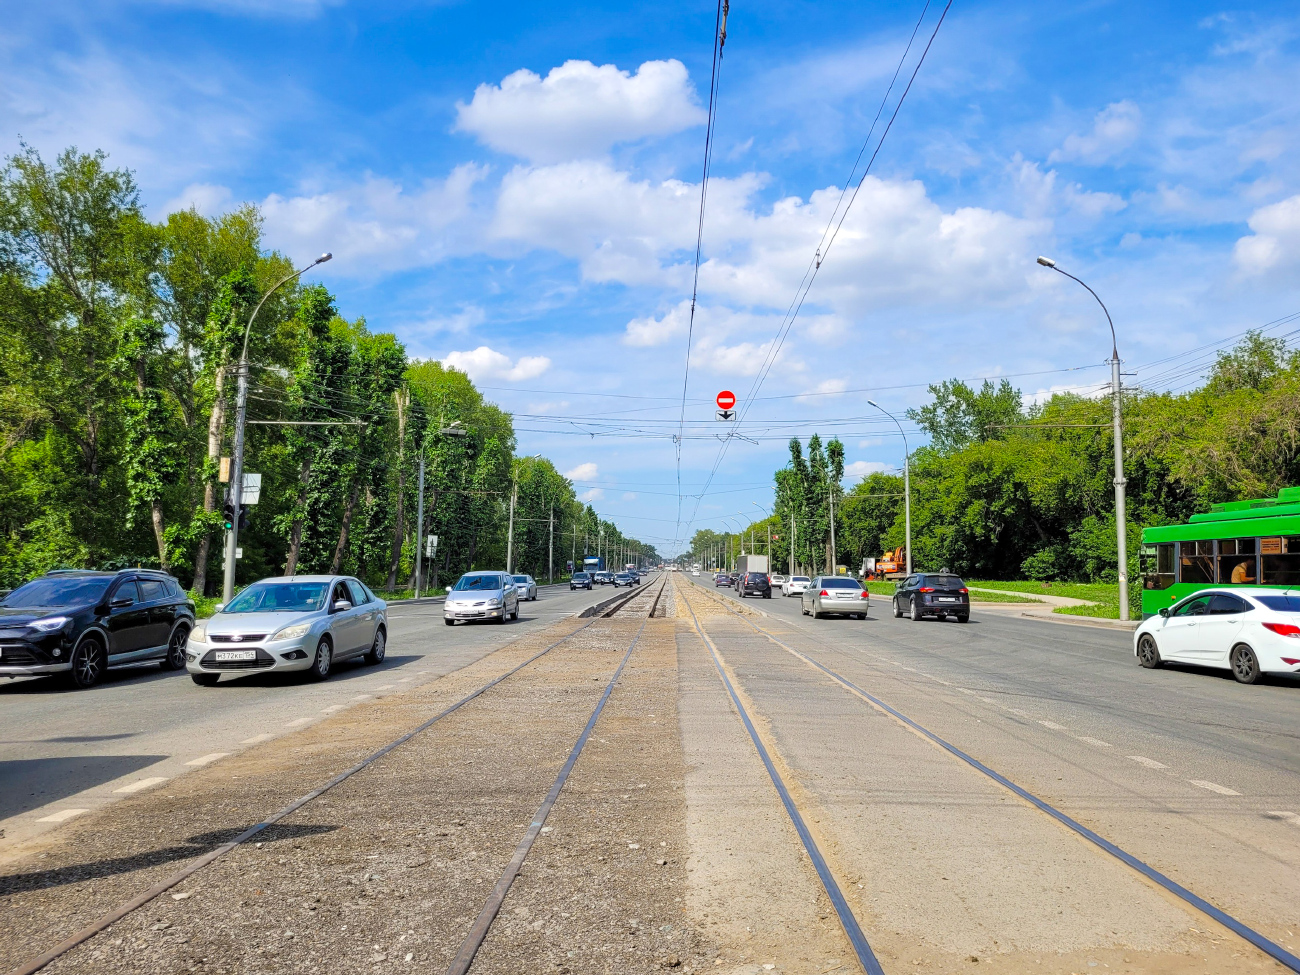 Nowosibirsk — Tram and trolleybus roads